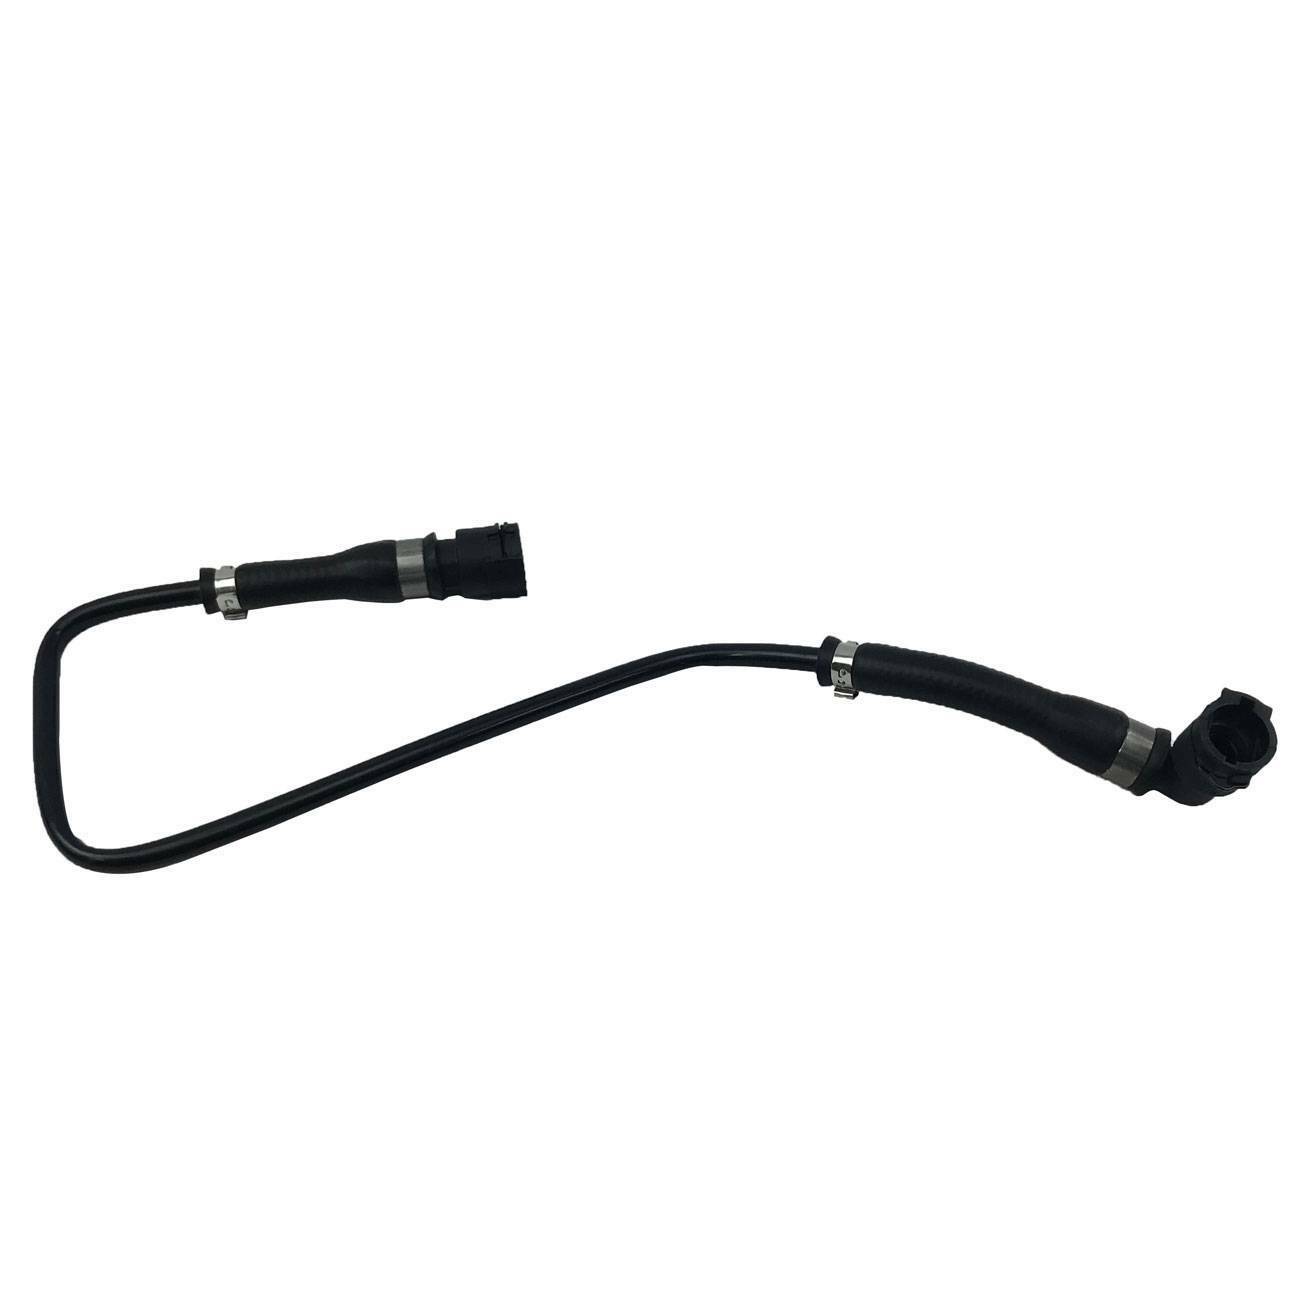 Expansion Tank Coolant Hose for 00-06 BMW E53 X5 4.4i 4.6is 11531439123 German Made